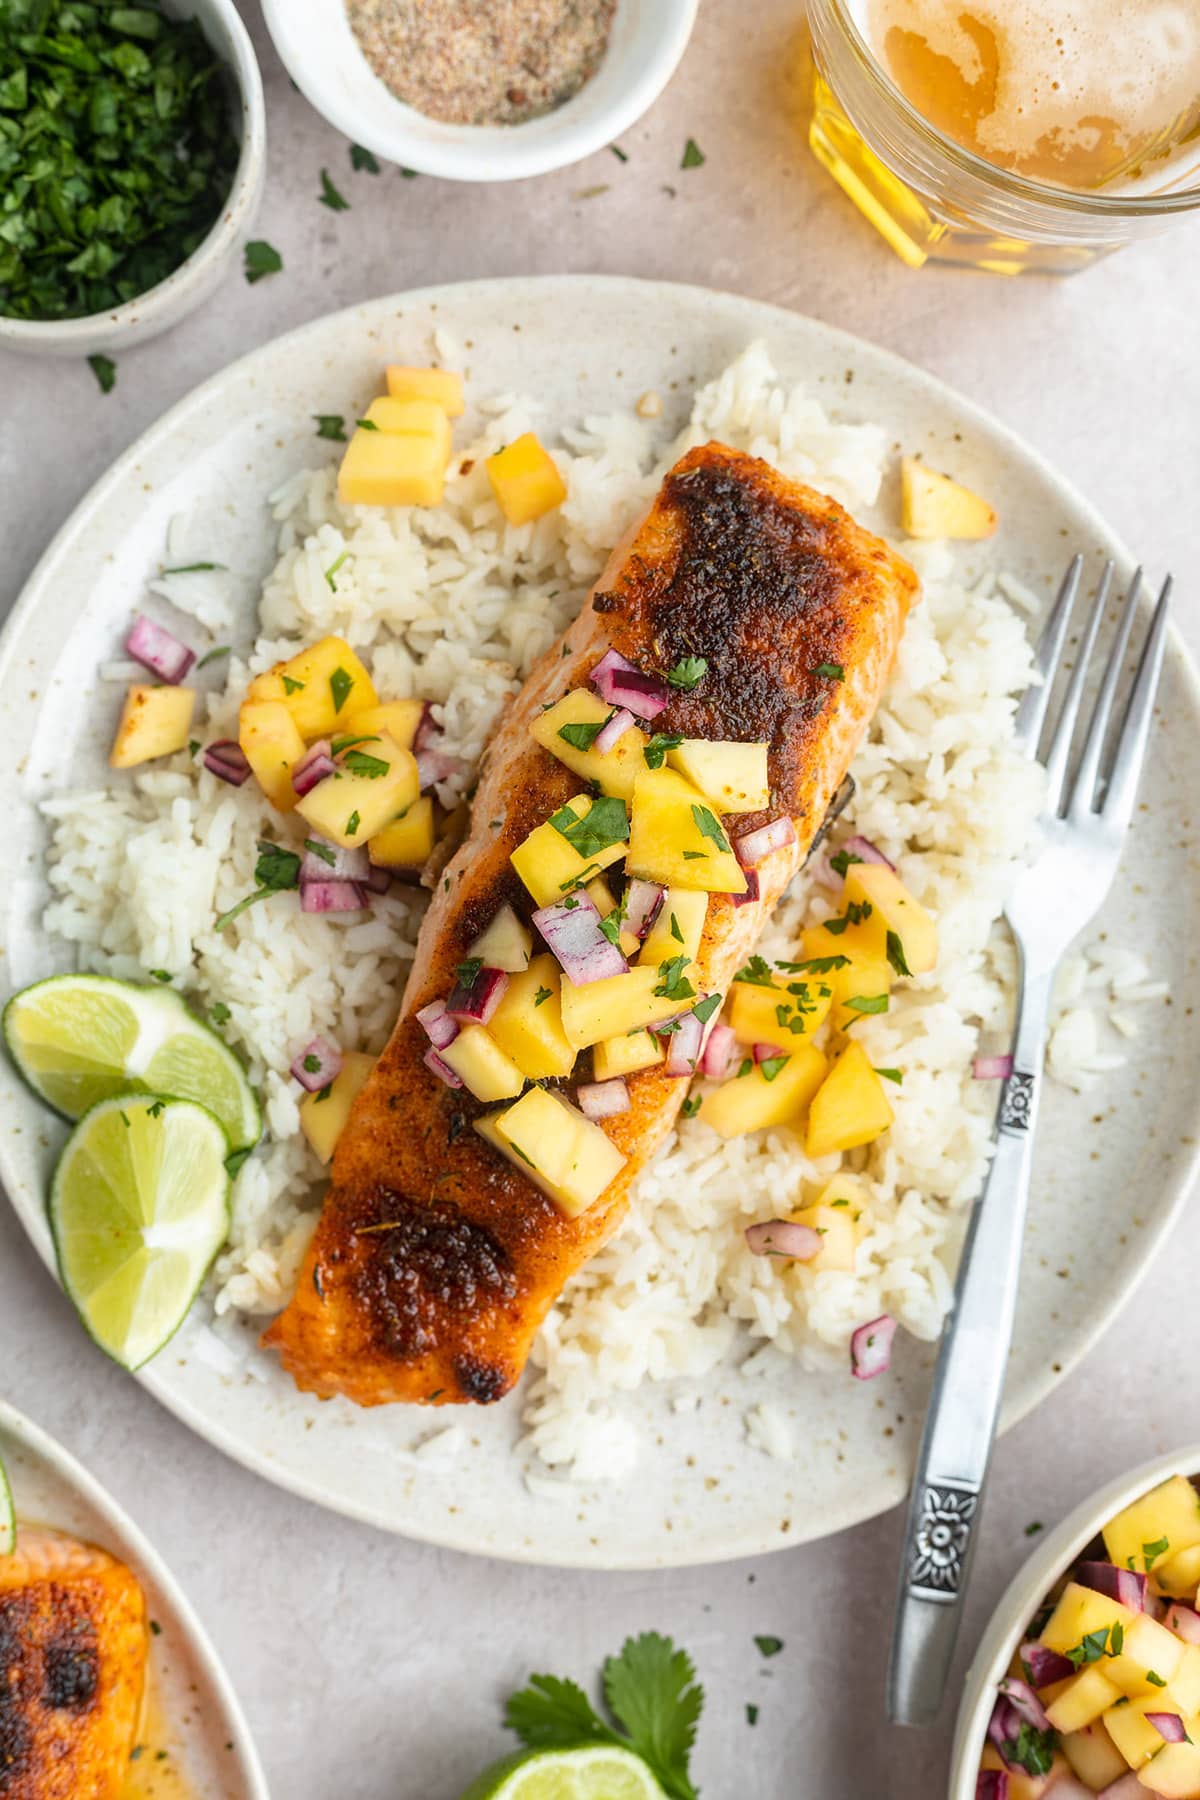 Jerk salmon topped with mango and red onion salsa on a plate with white rice and lime wedges.